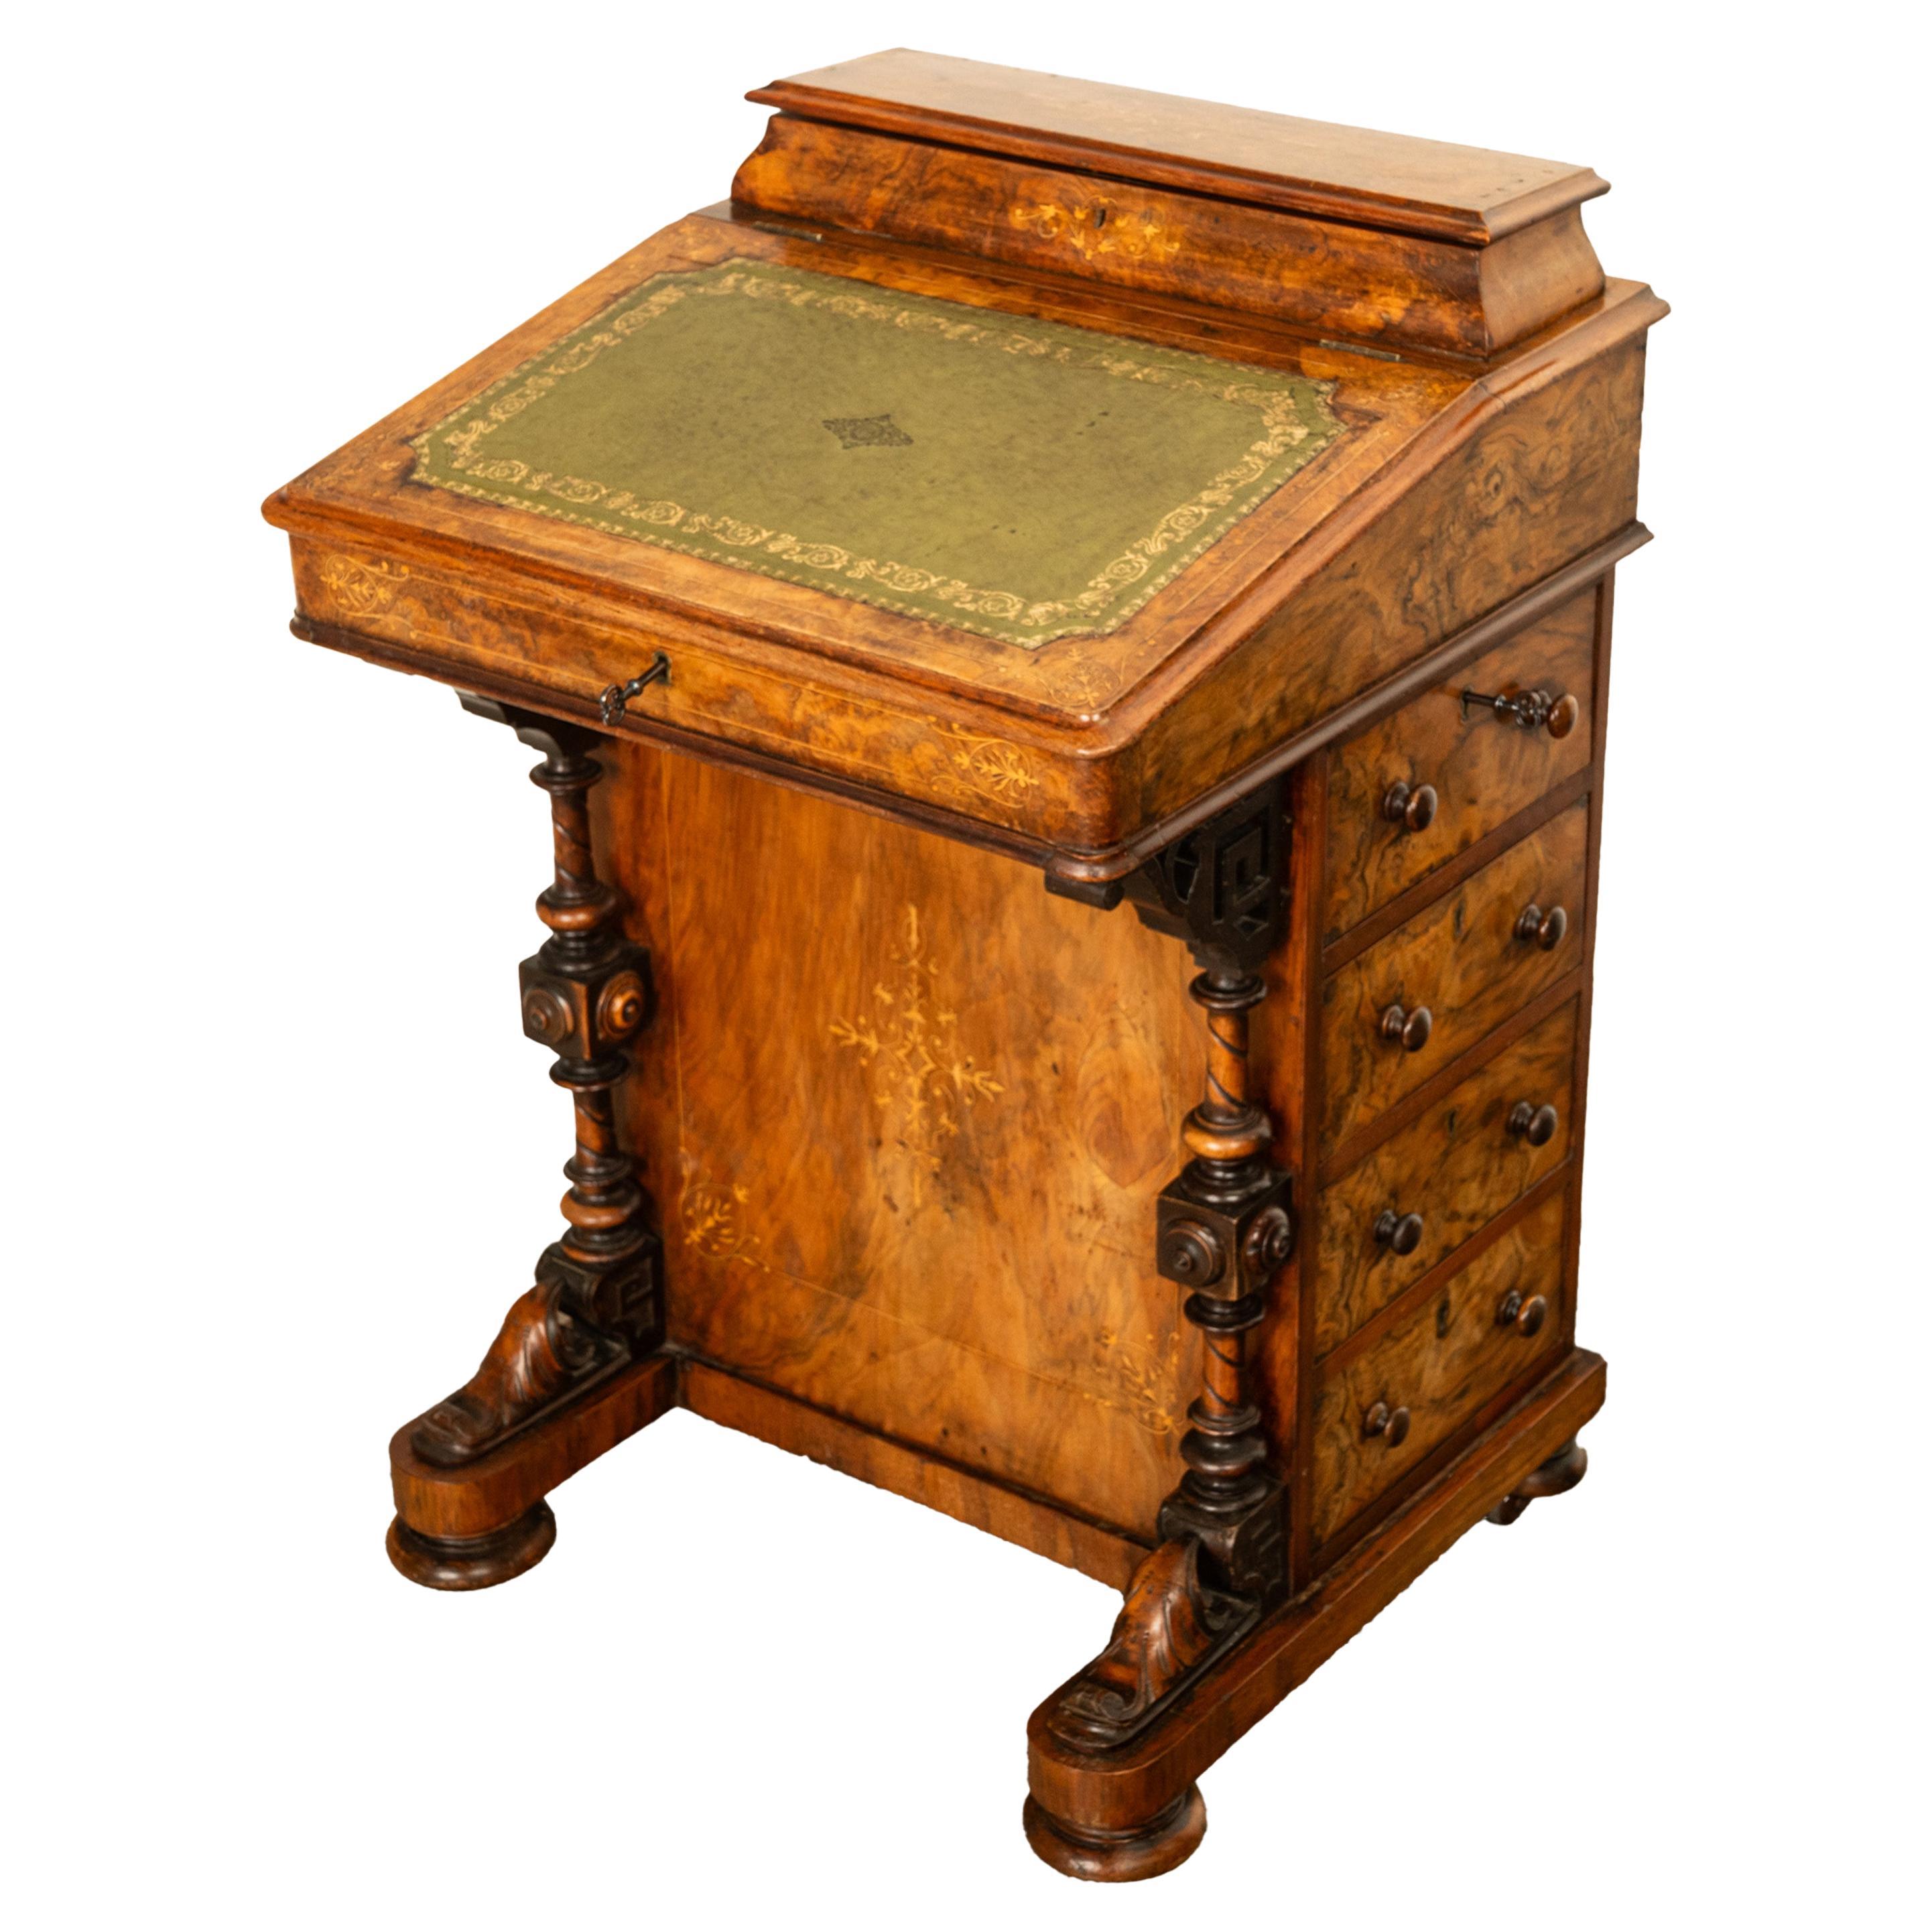 Antique Victorian Burl Walnut Inlaid Marquetry Carved Davenport Desk 1860 For Sale